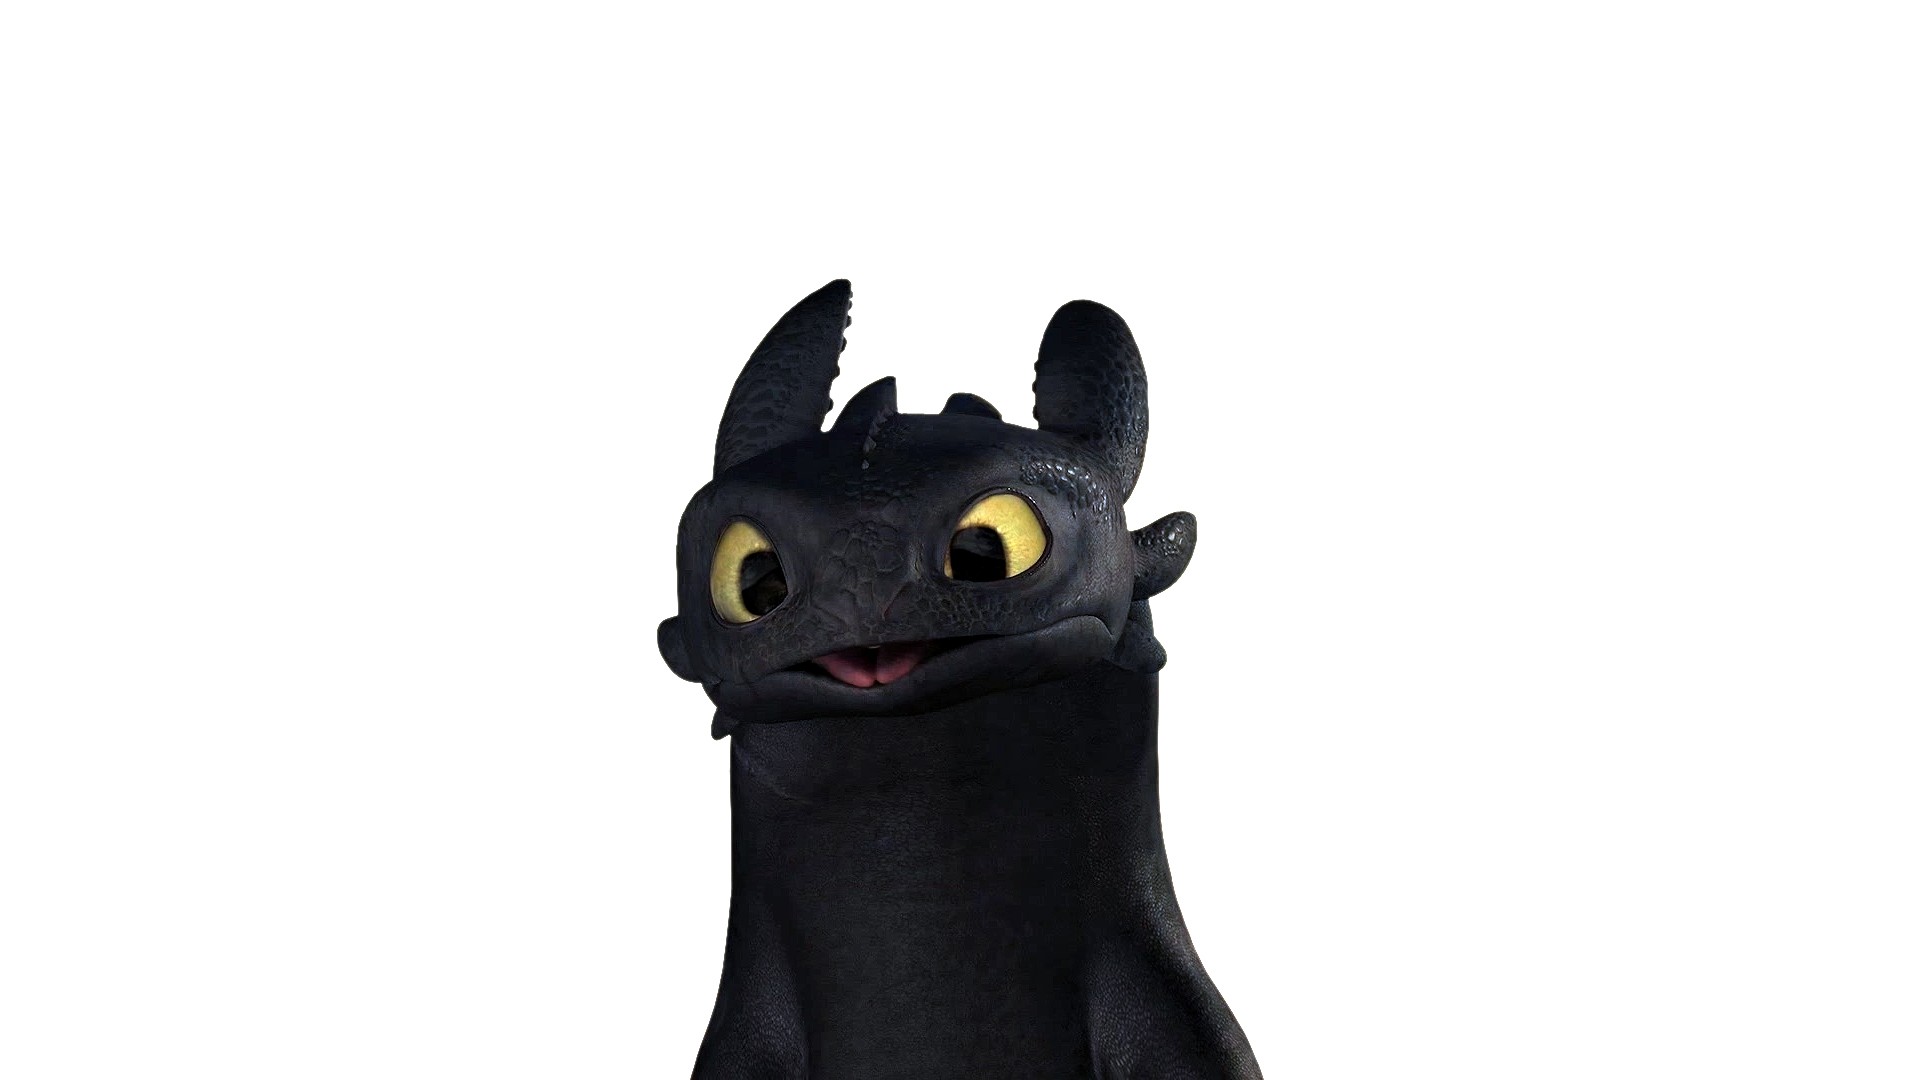 Toothless Night Fury How To Train Your Dragon How To Train Your Dragon 2 1920x1080